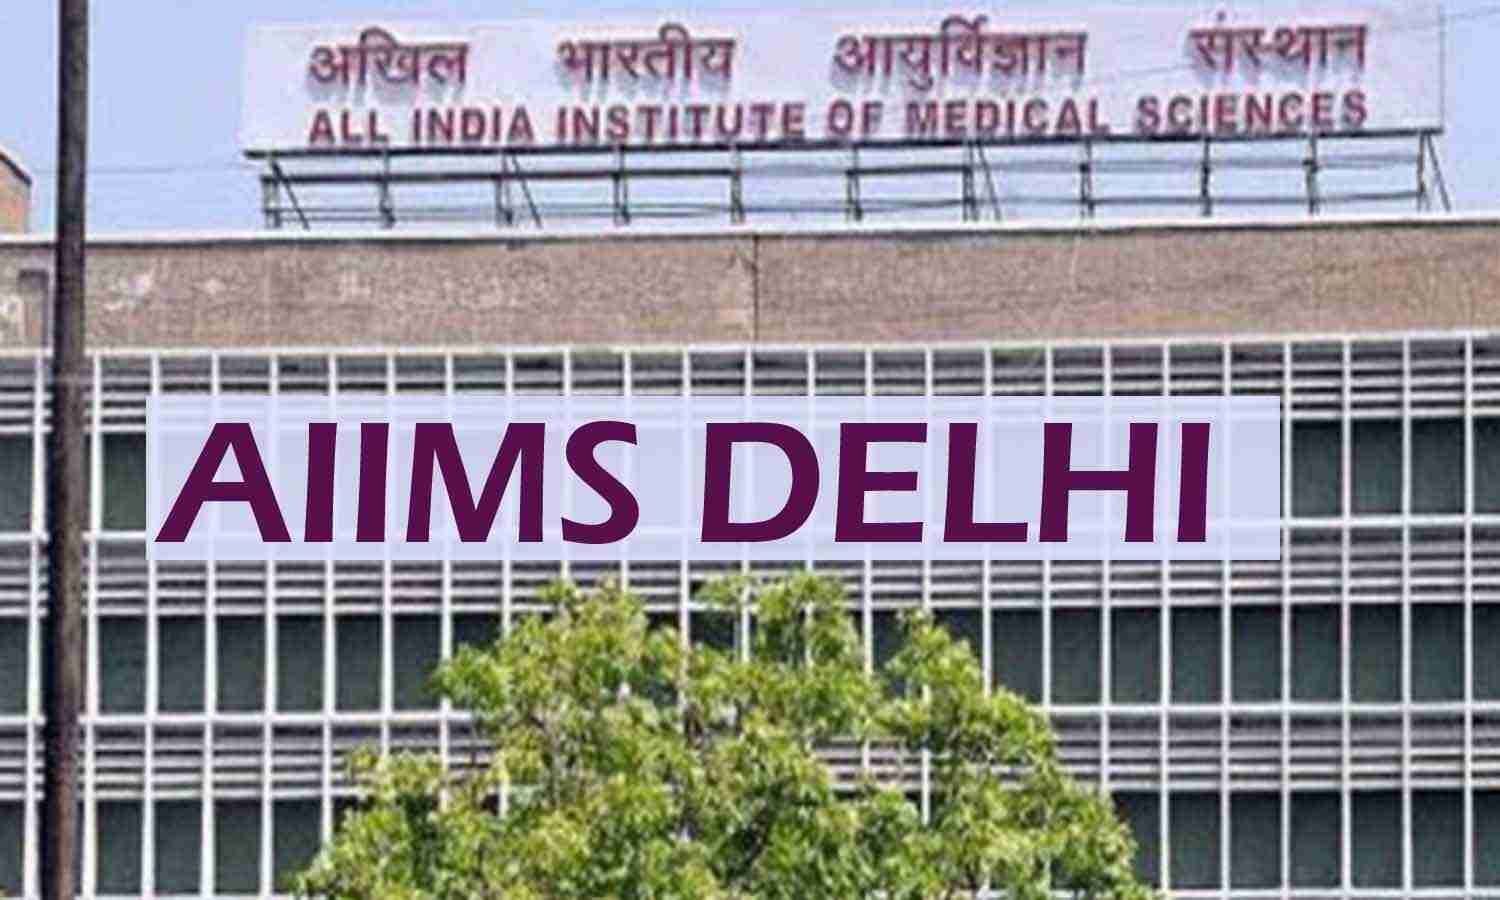 AIIMS Delhi redevelopment plan: 2143 trees to be cut down, approval awaited